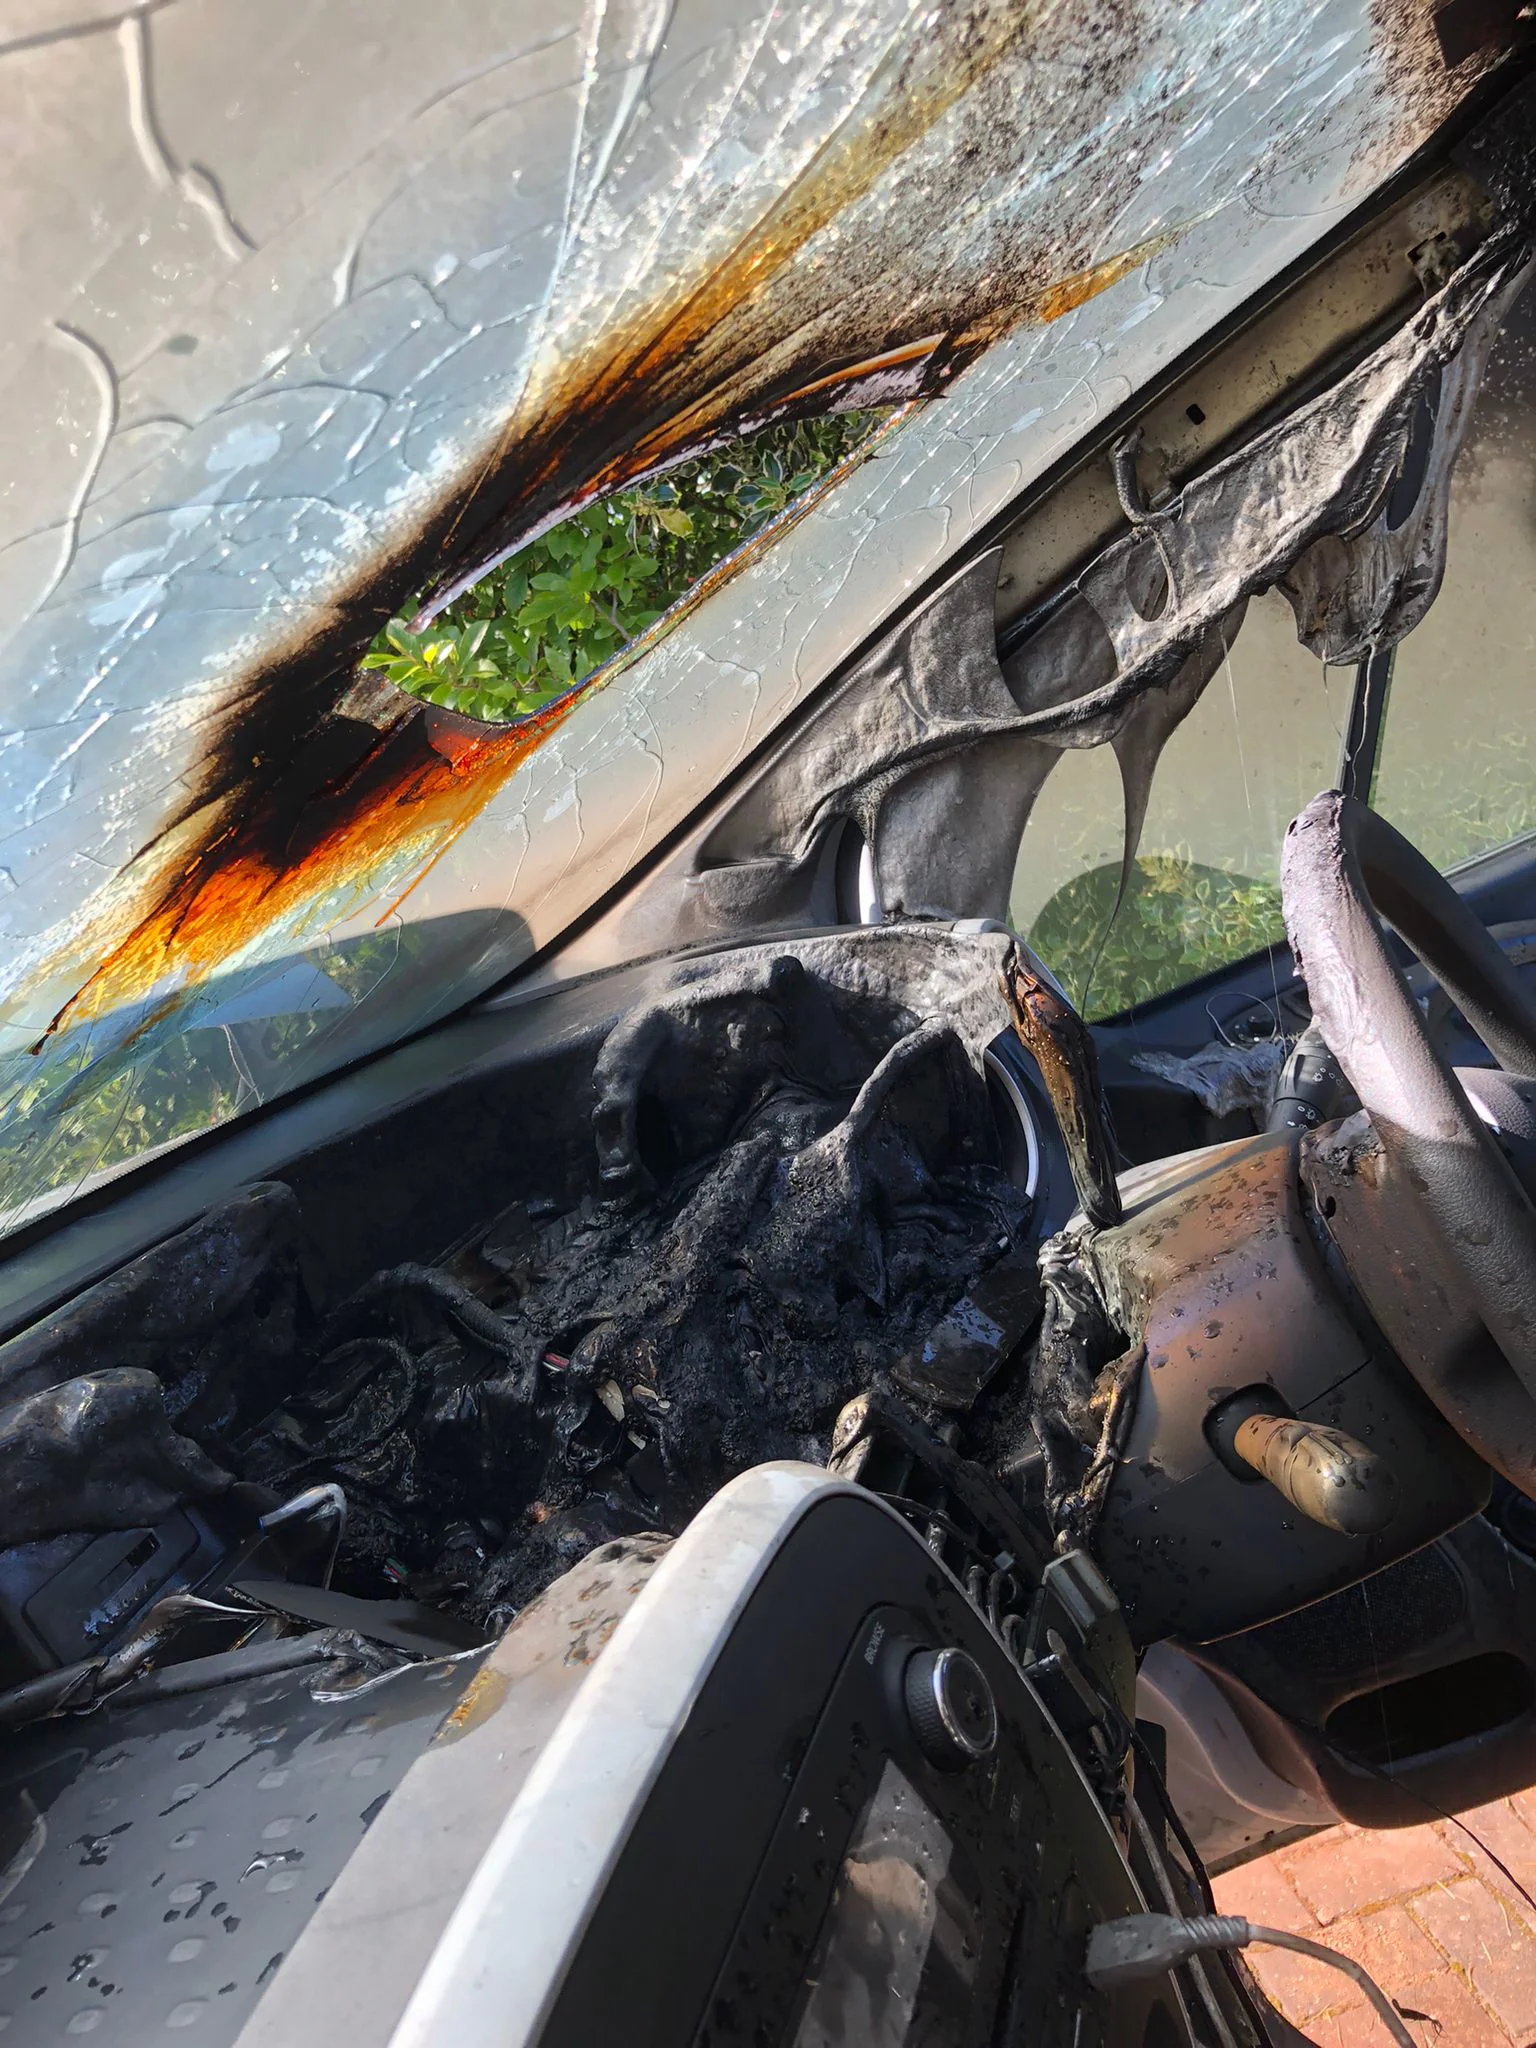 The burnt out inside of a car with hole in the windscreen where sunlight has been refracted